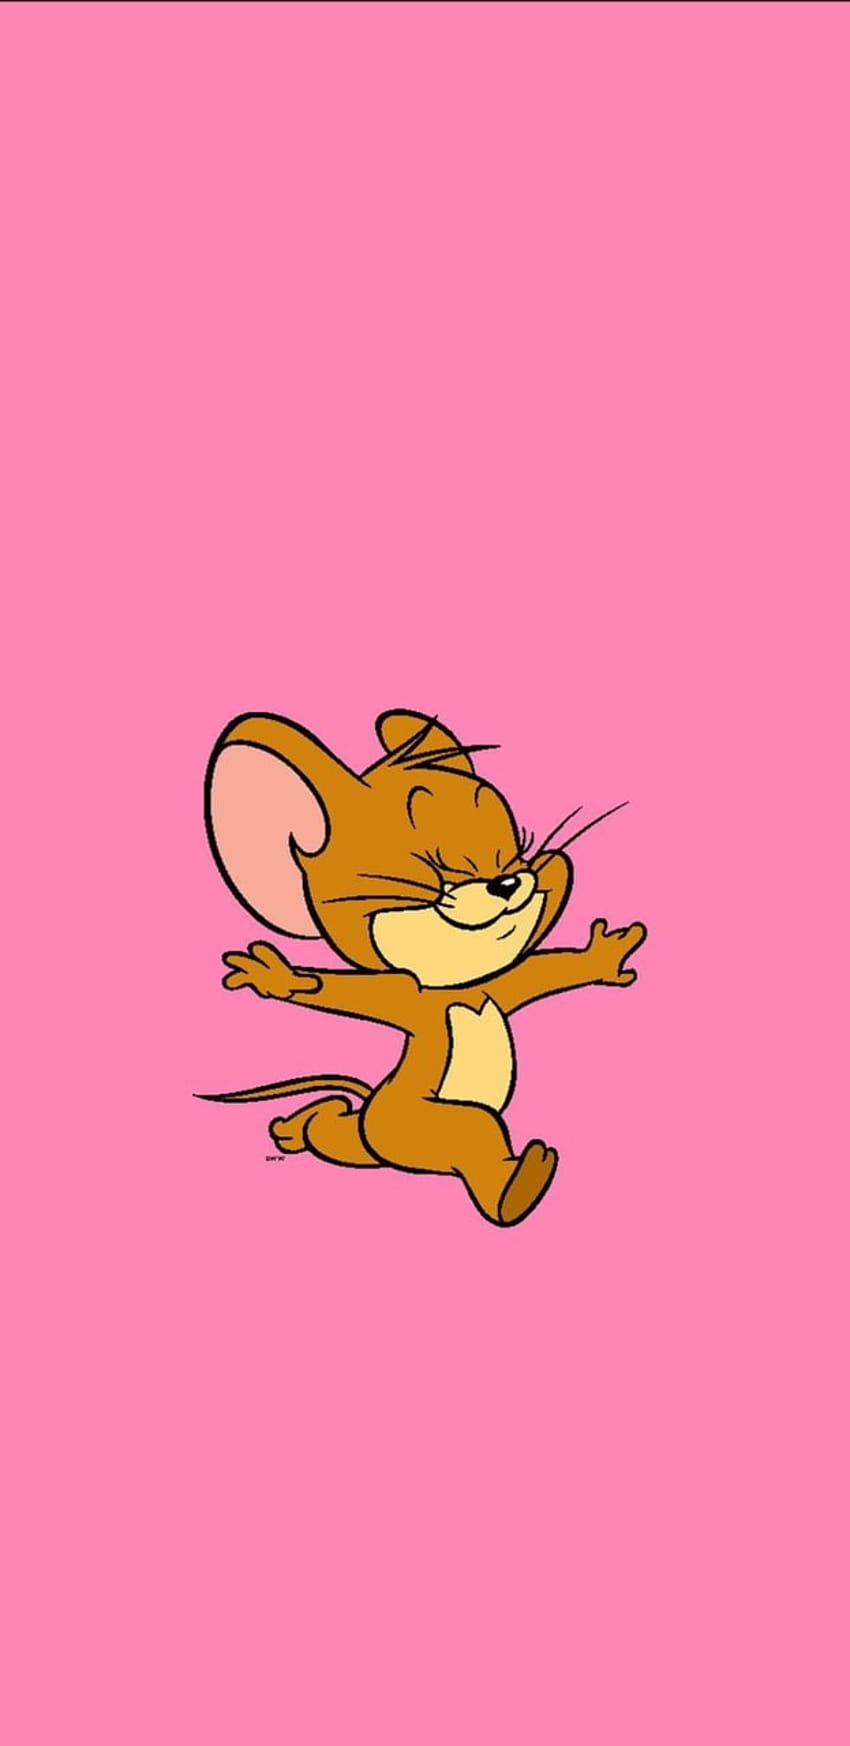 jerry the mouse in love